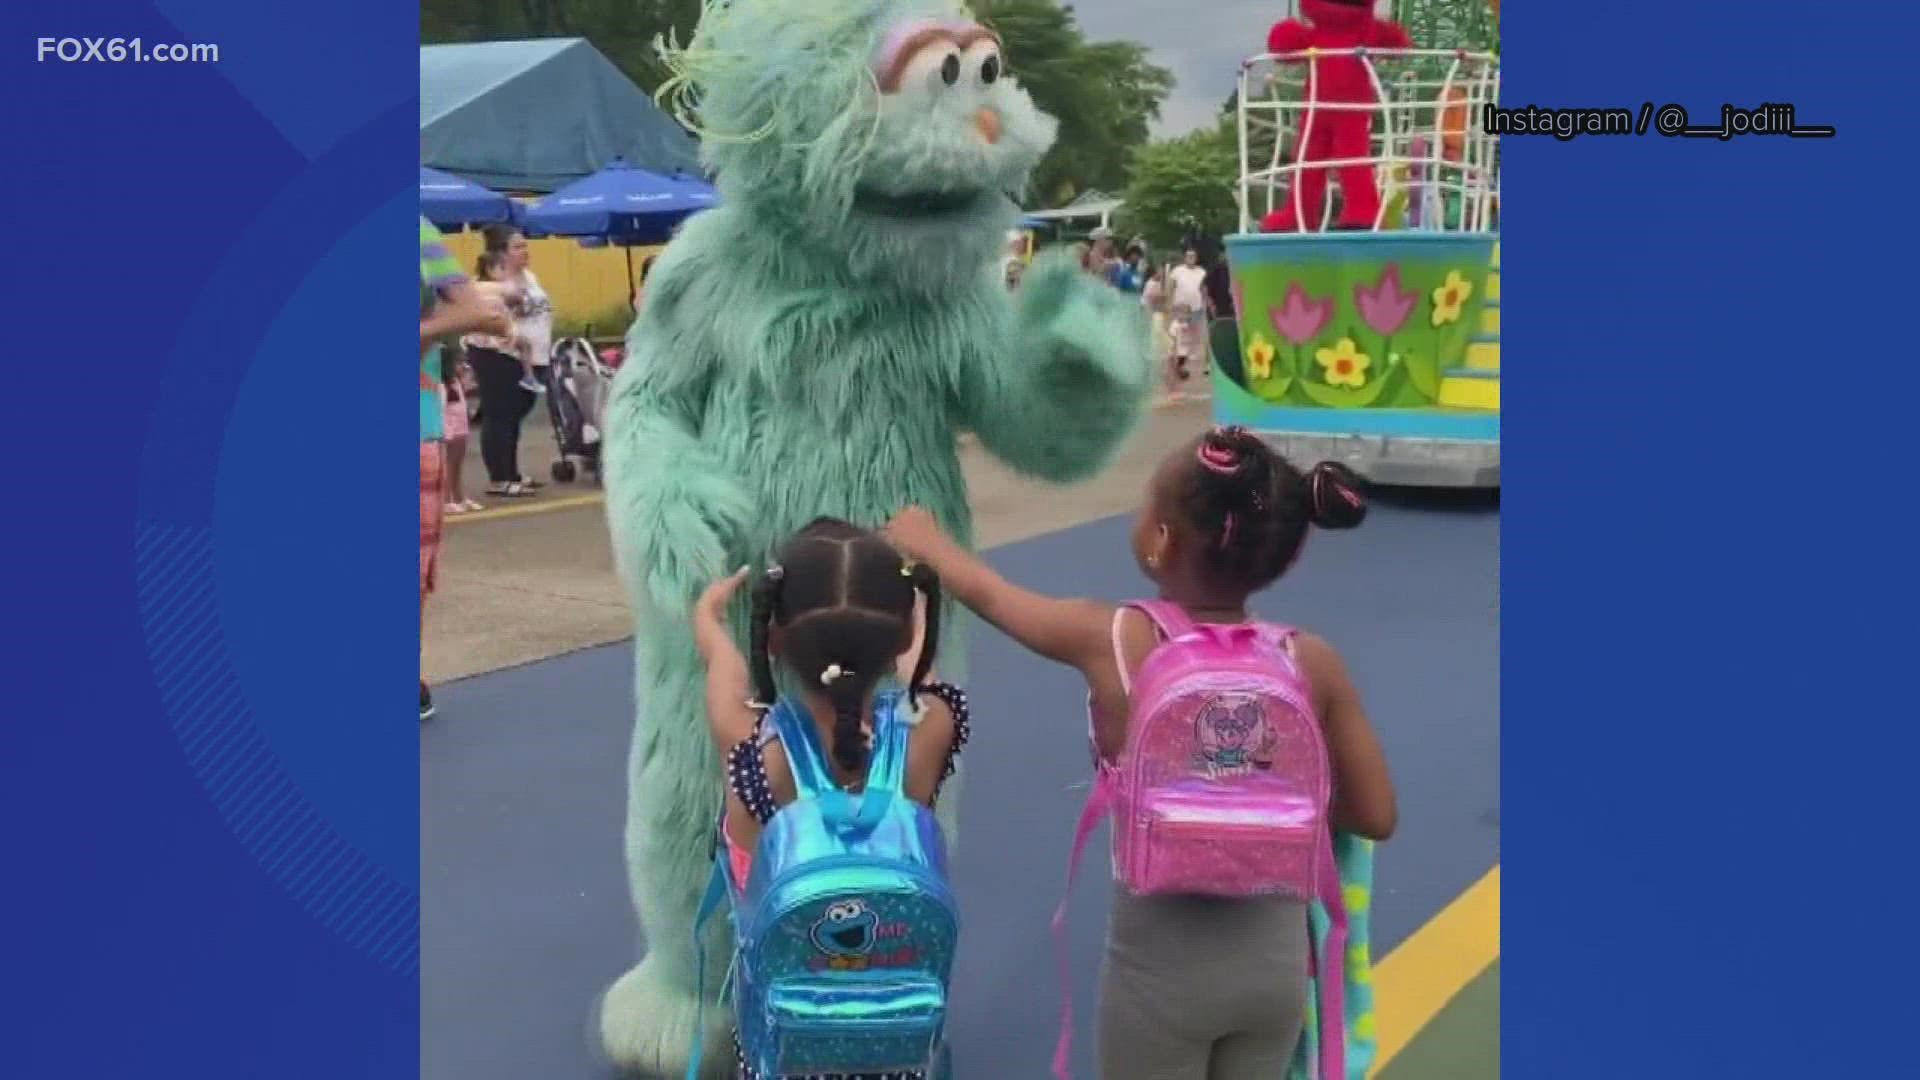 Social media is buzzing after a mother posted a video of her kids at the sesame street parade at Sesame Place in Philadelphia